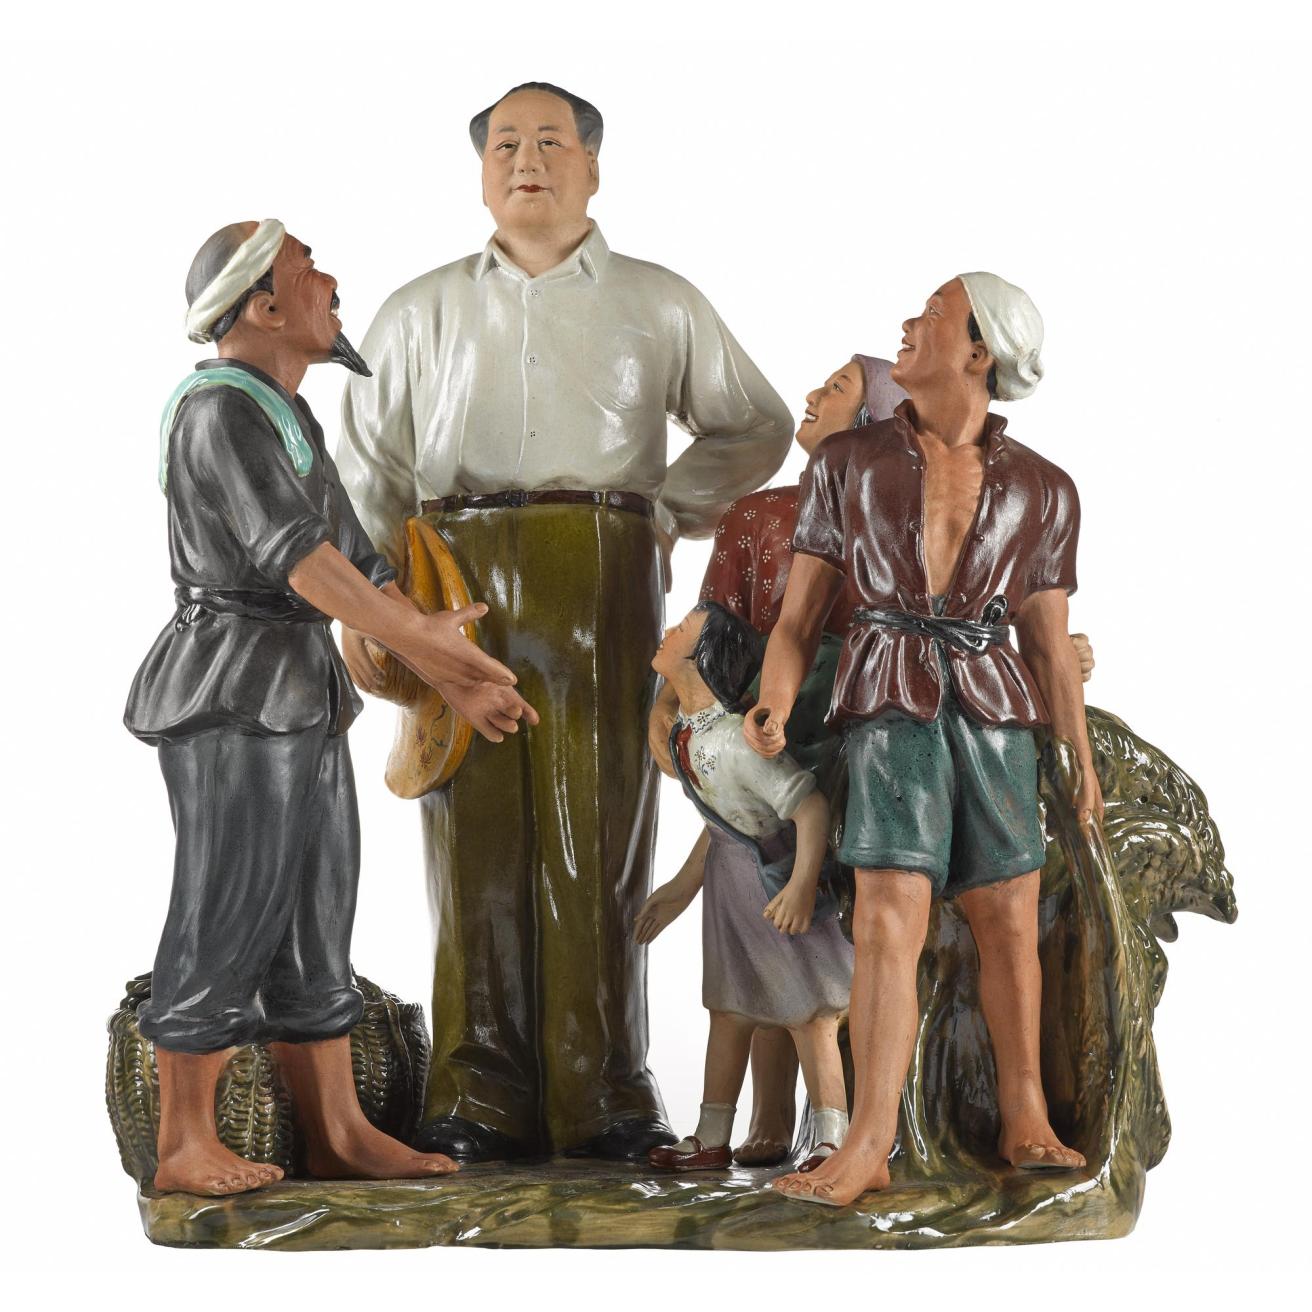 Porcelain figure group entitled Looking up to Mao: China, Jingdezhen, 1972-74.